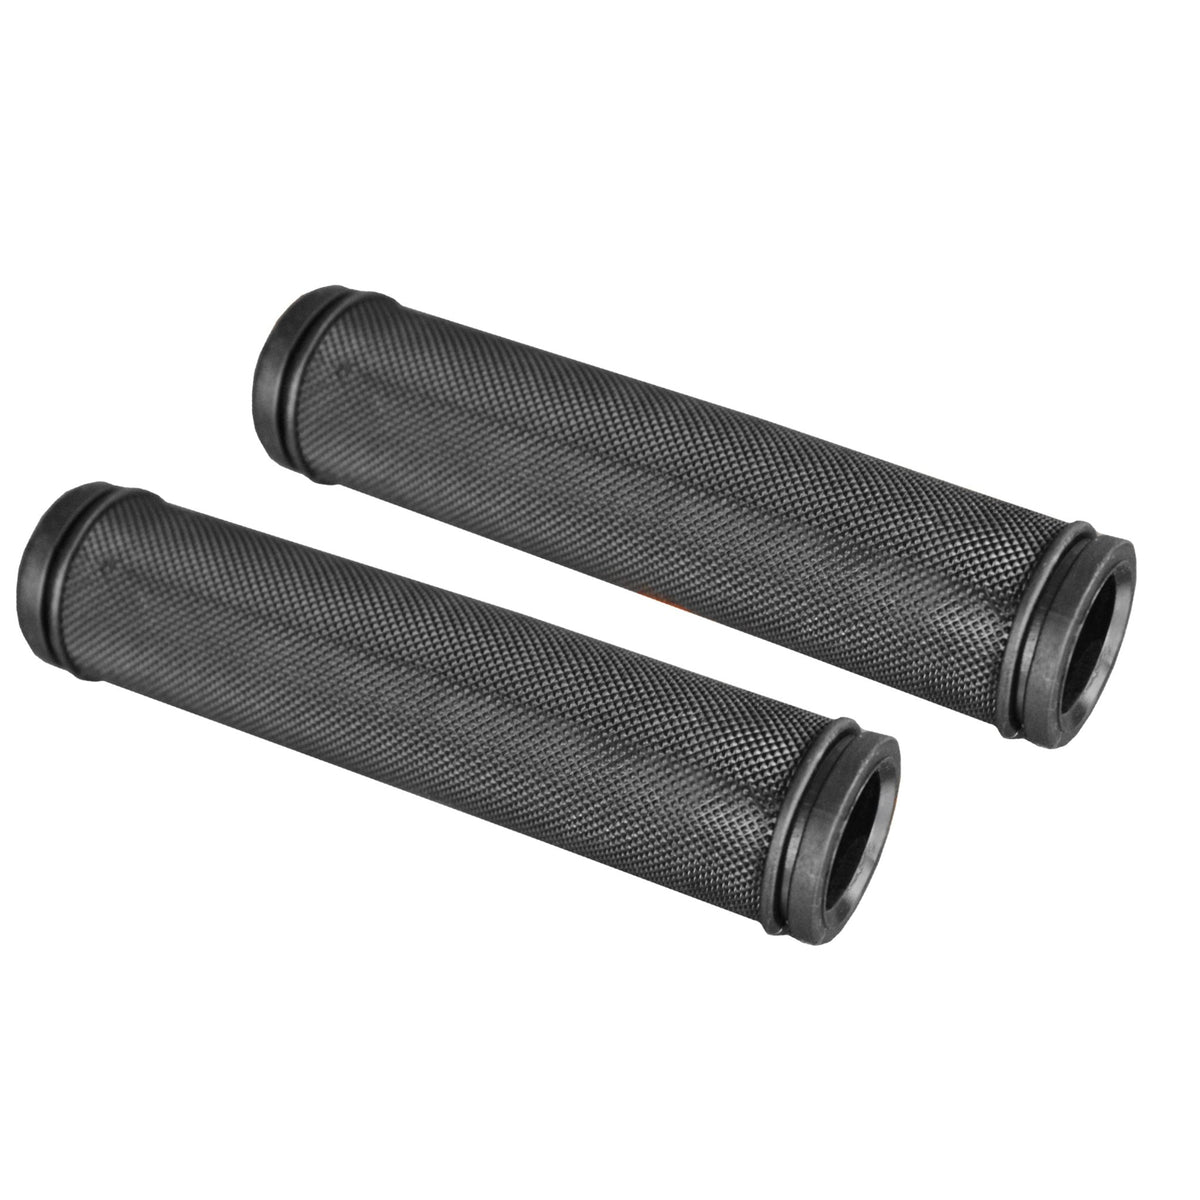 Capstone Knurled Rubber Grips | Fits Most Adult Bikes